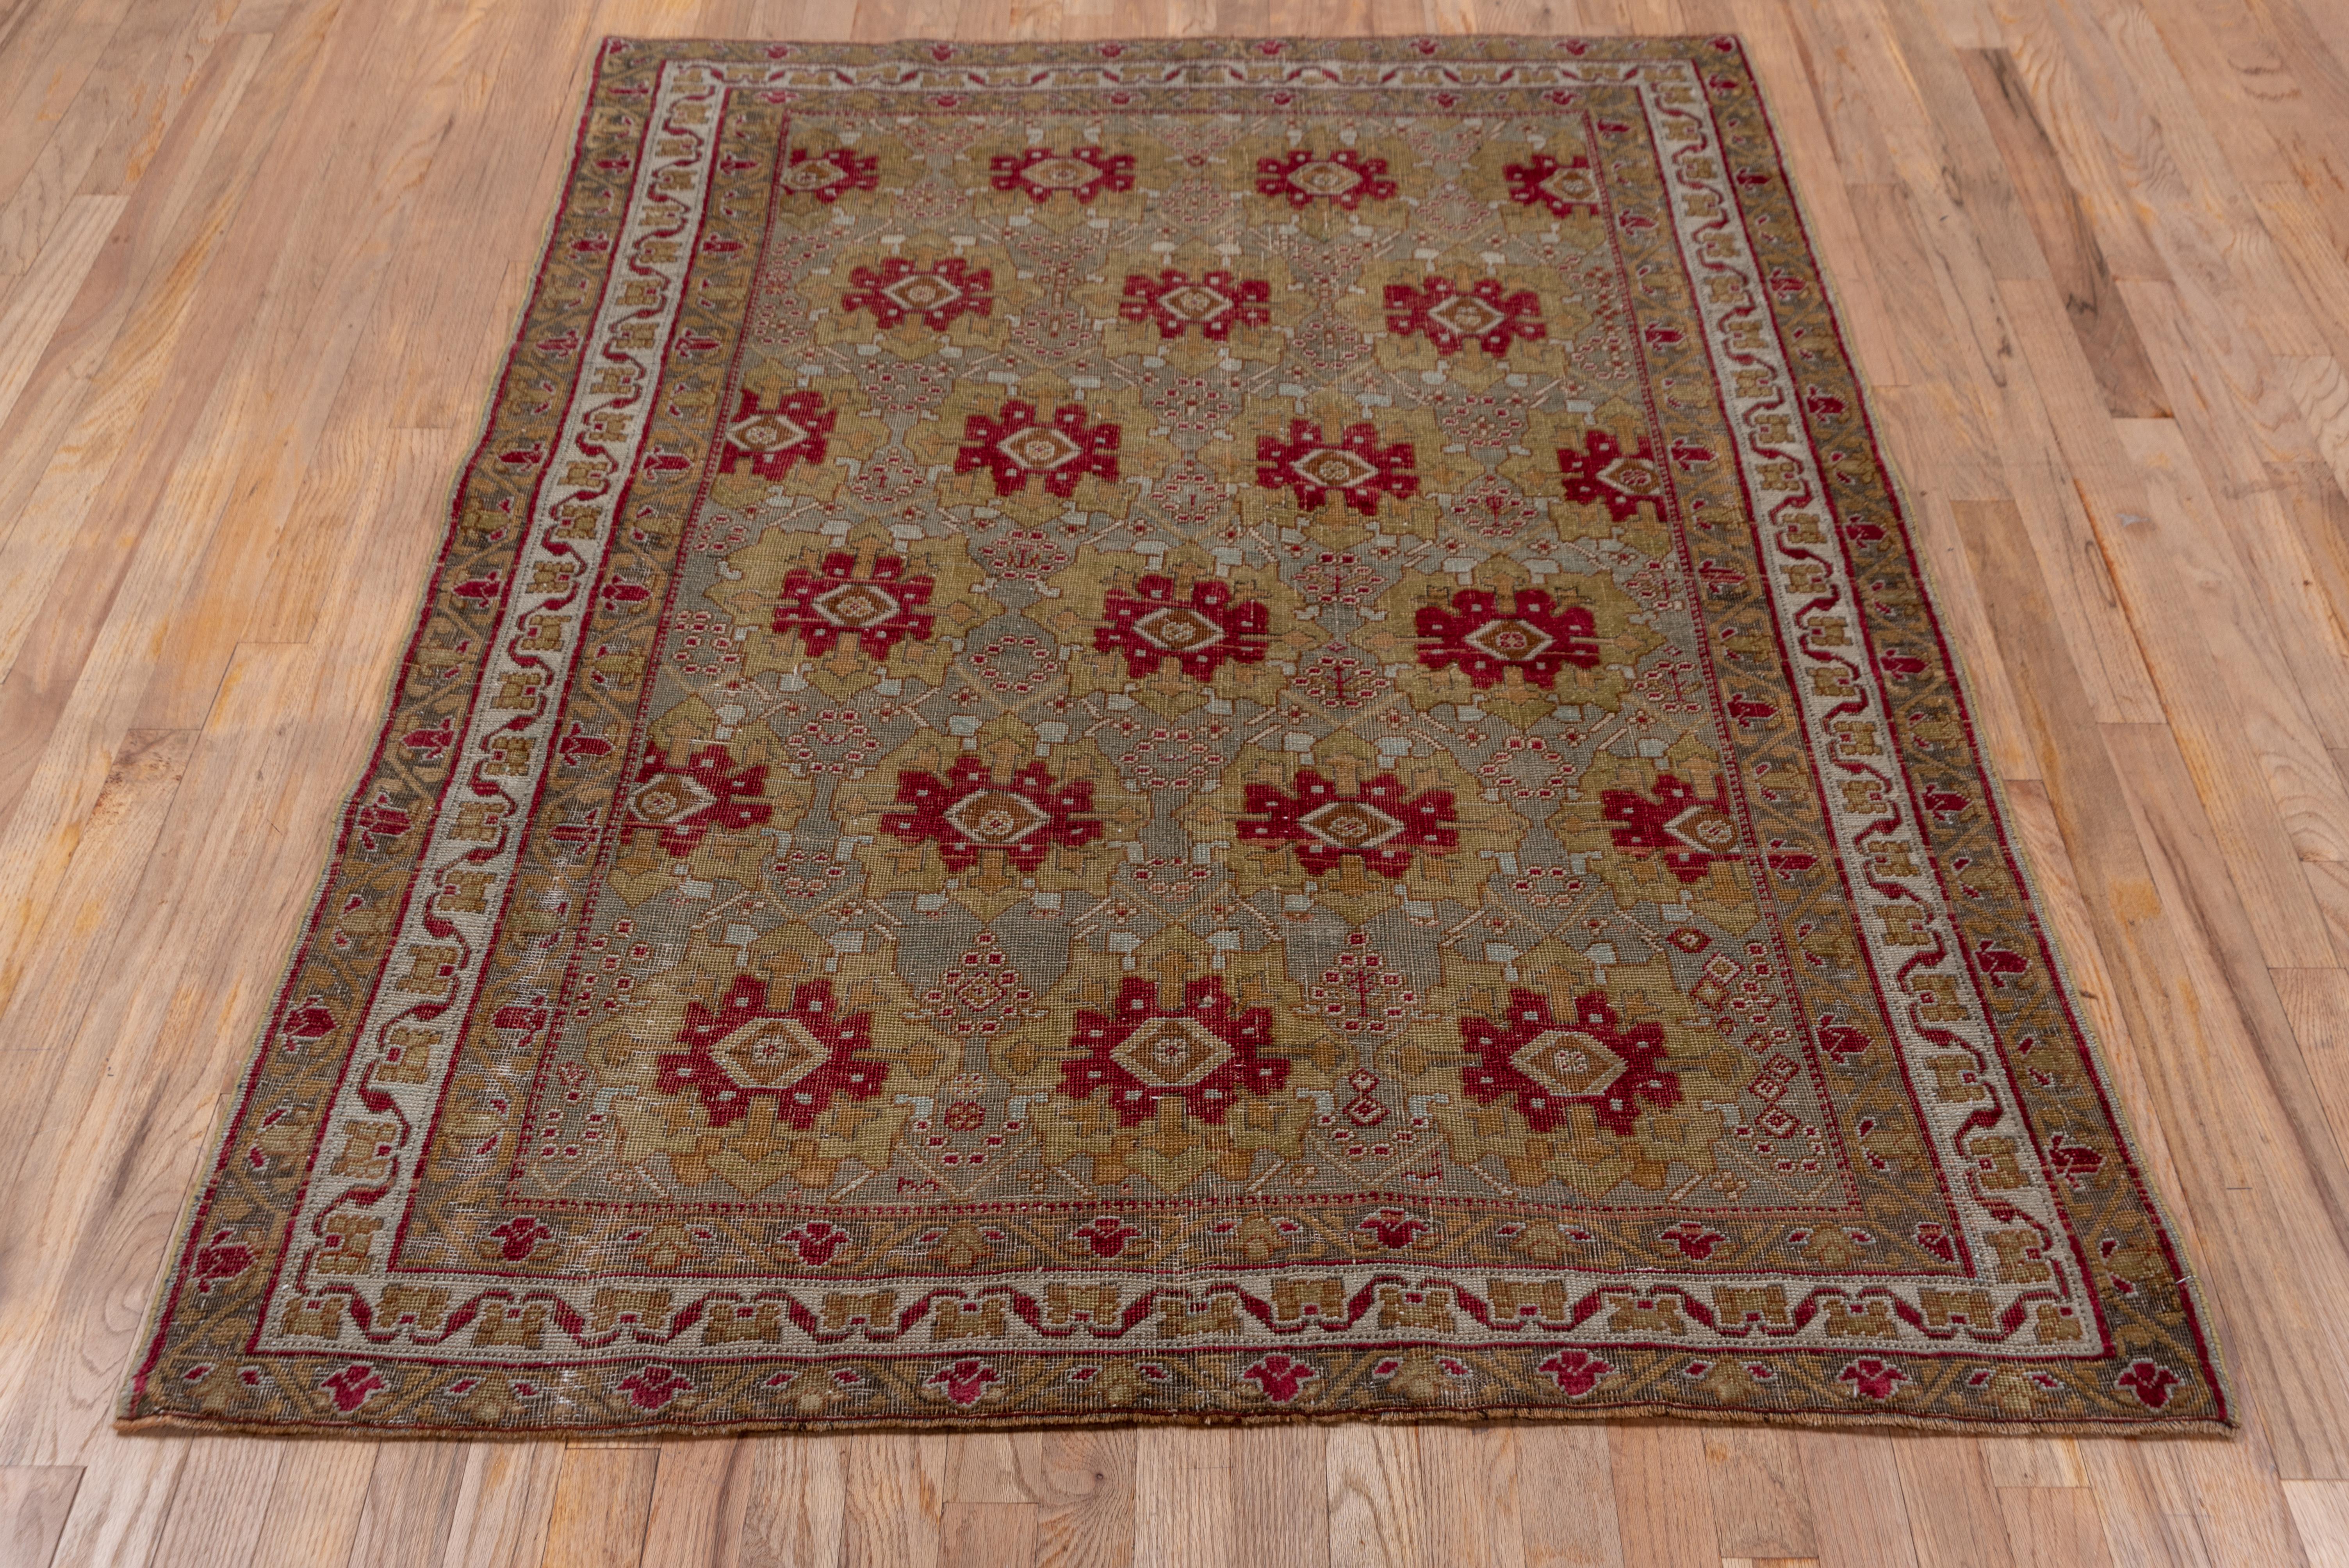 Six offset rows of complex rosettes with dark red centers decorate the mauvy-pink field of this SE Persian nomadic scatter with an ecru main border of squared fan palmettes. Characteristic pattern and weave quality.